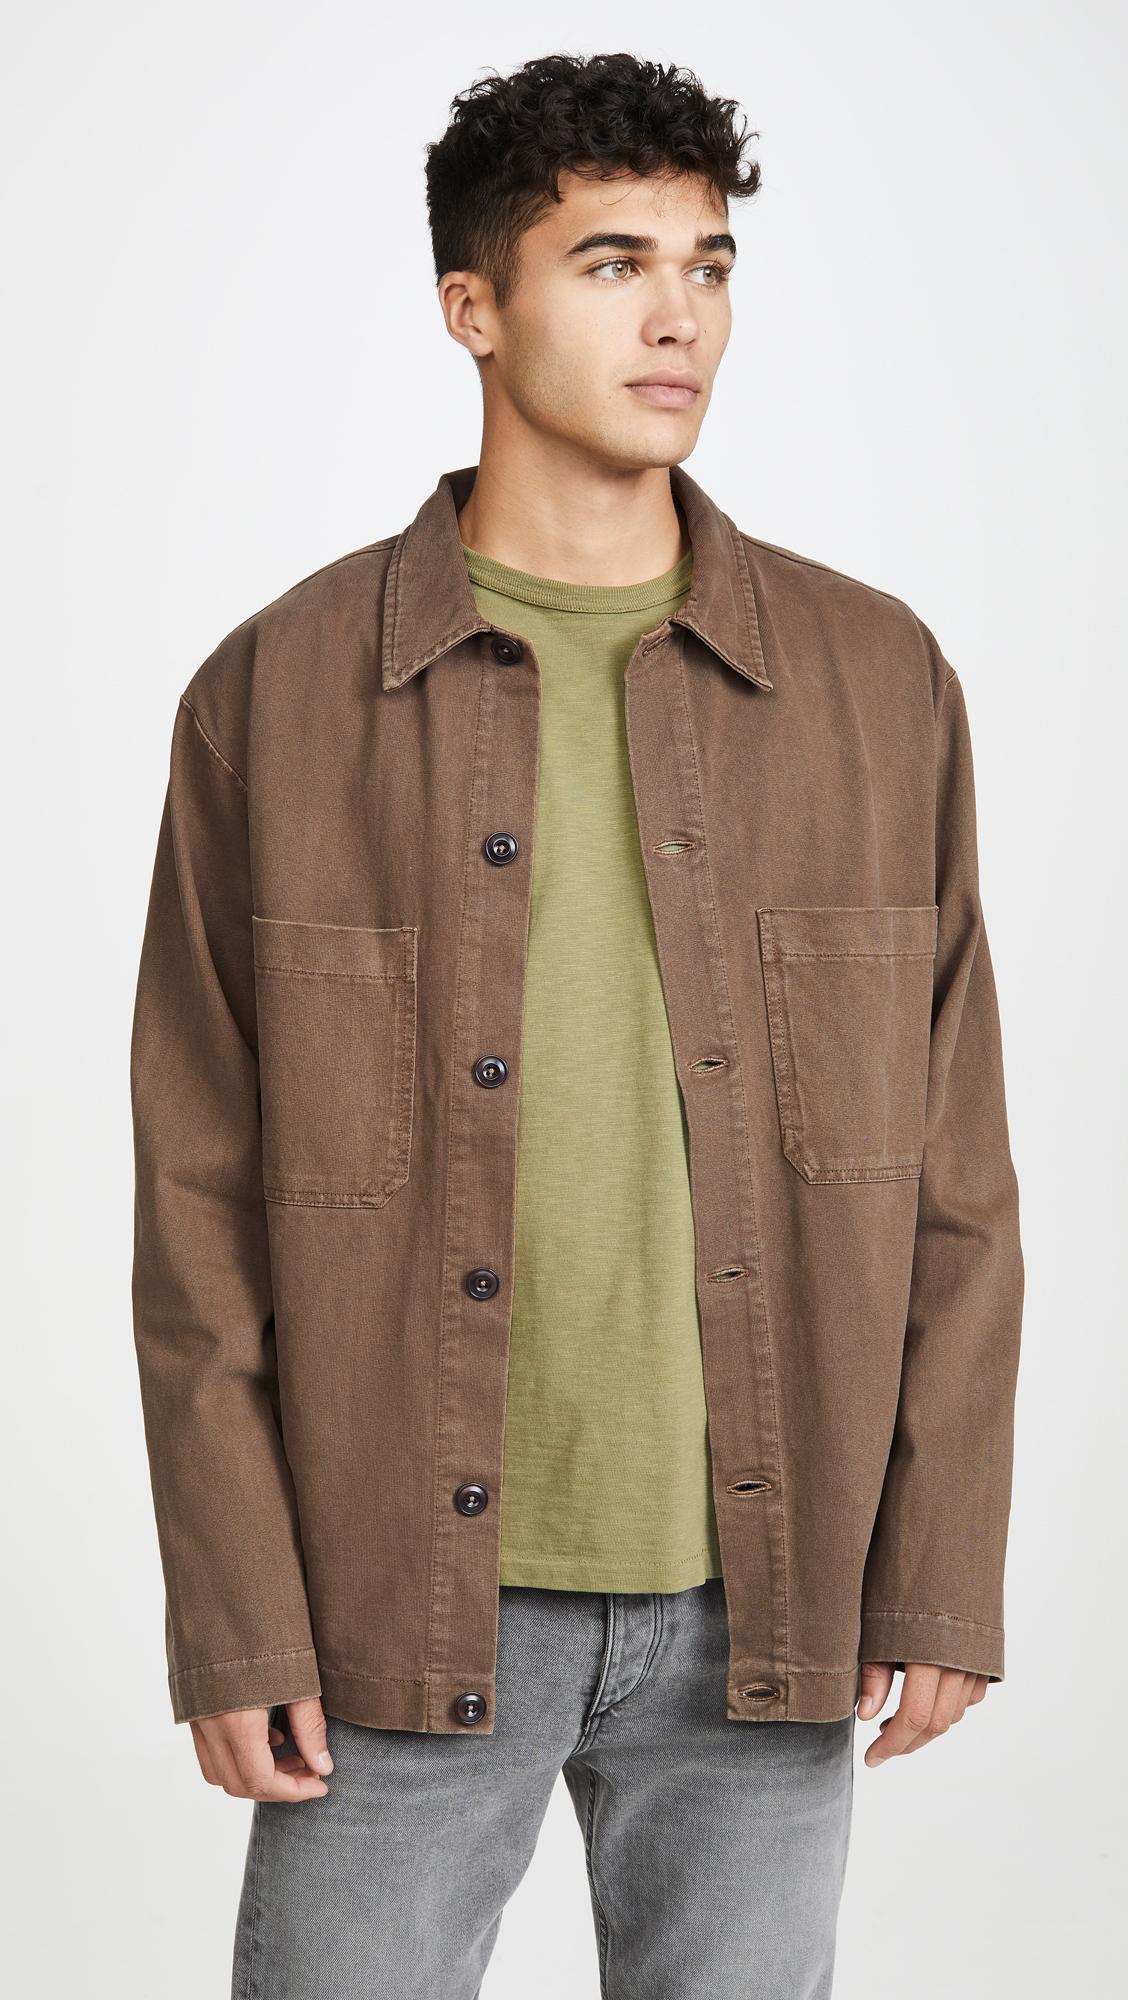 Lemaire Denim Heavy Jersey Overshirt in Brown for Men - Lyst